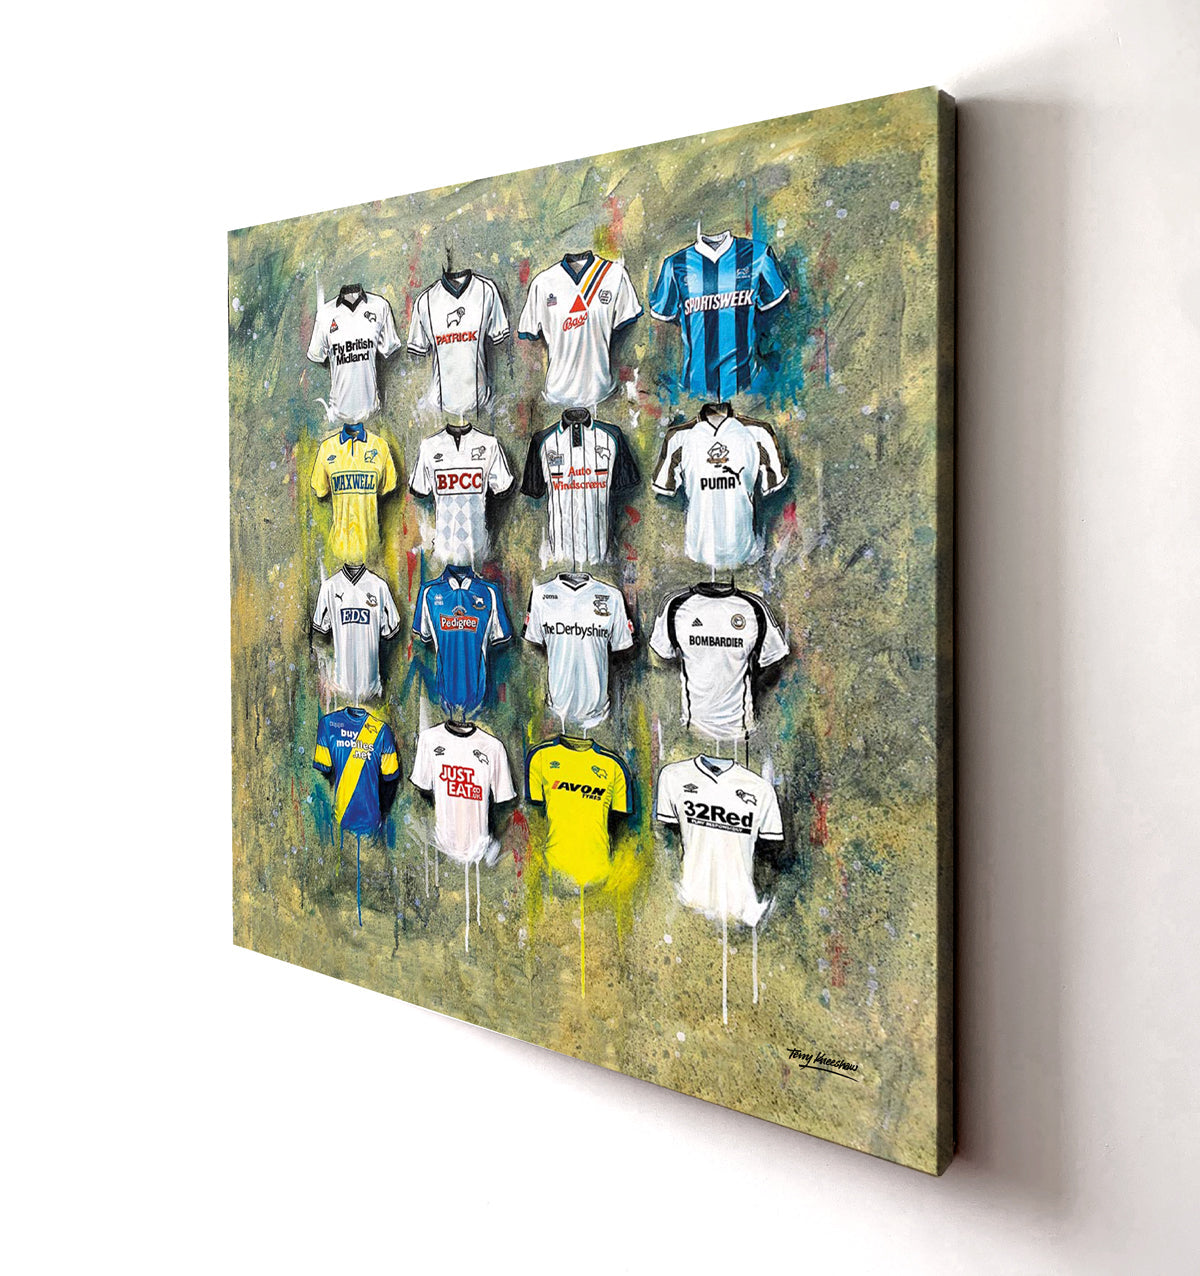 These stunning Derby County Canvases from Terry Kneeshaw are perfect for any fan of the team. The various sizes available include 20x20, 30x30, or 40x40, and you can choose between framed or unframed with a black floating frame. The artwork showcases the team's logo and iconic moments, all hand-painted in high-quality acrylics. These canvases are sure to be a standout feature in any Derby County supporter's collection.